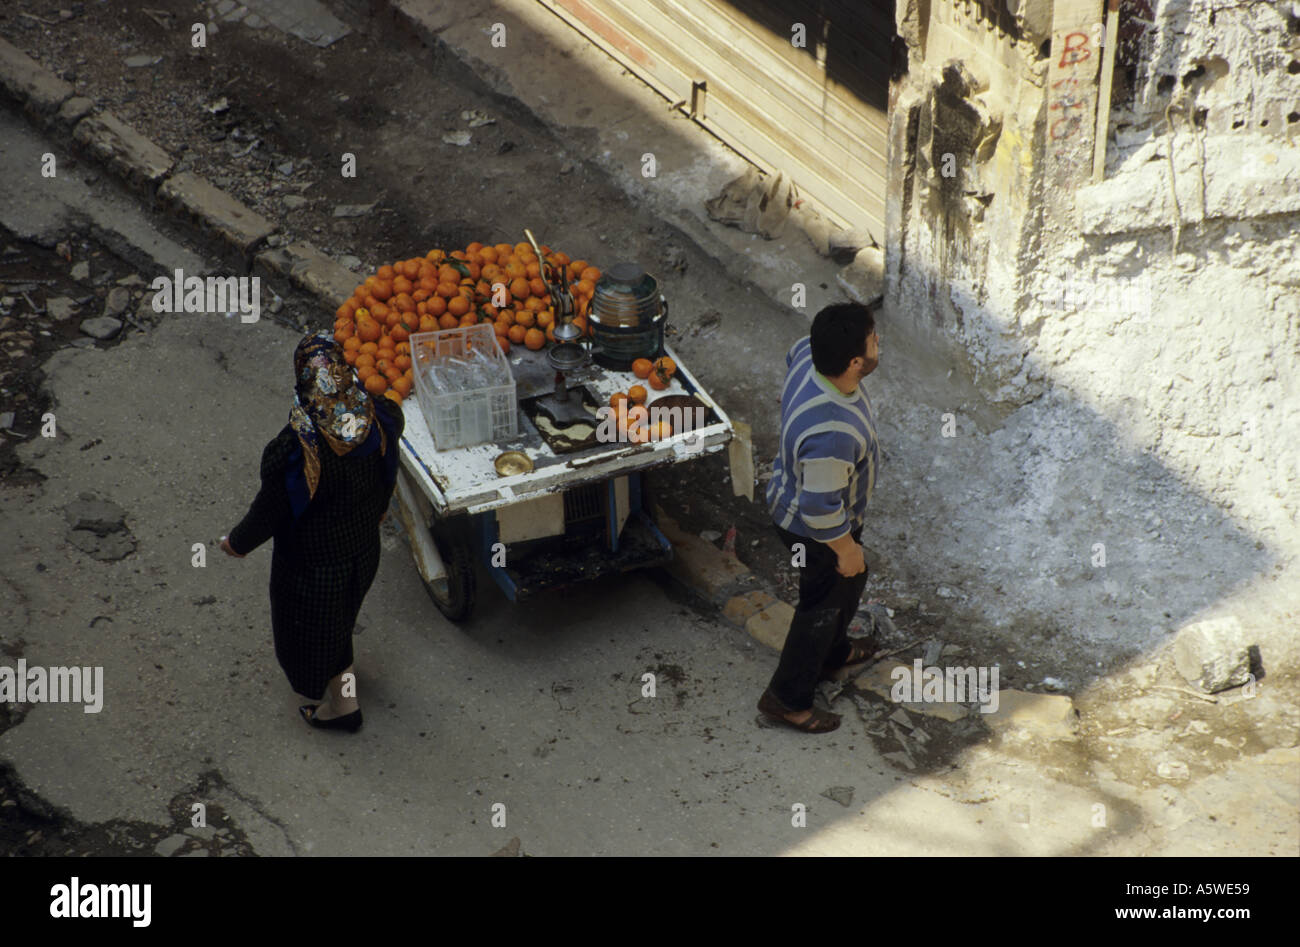 Lebanon Beirut In April 1994 After The Civil War Above A Fruit Seller And A Muslim Woman Stock Photo